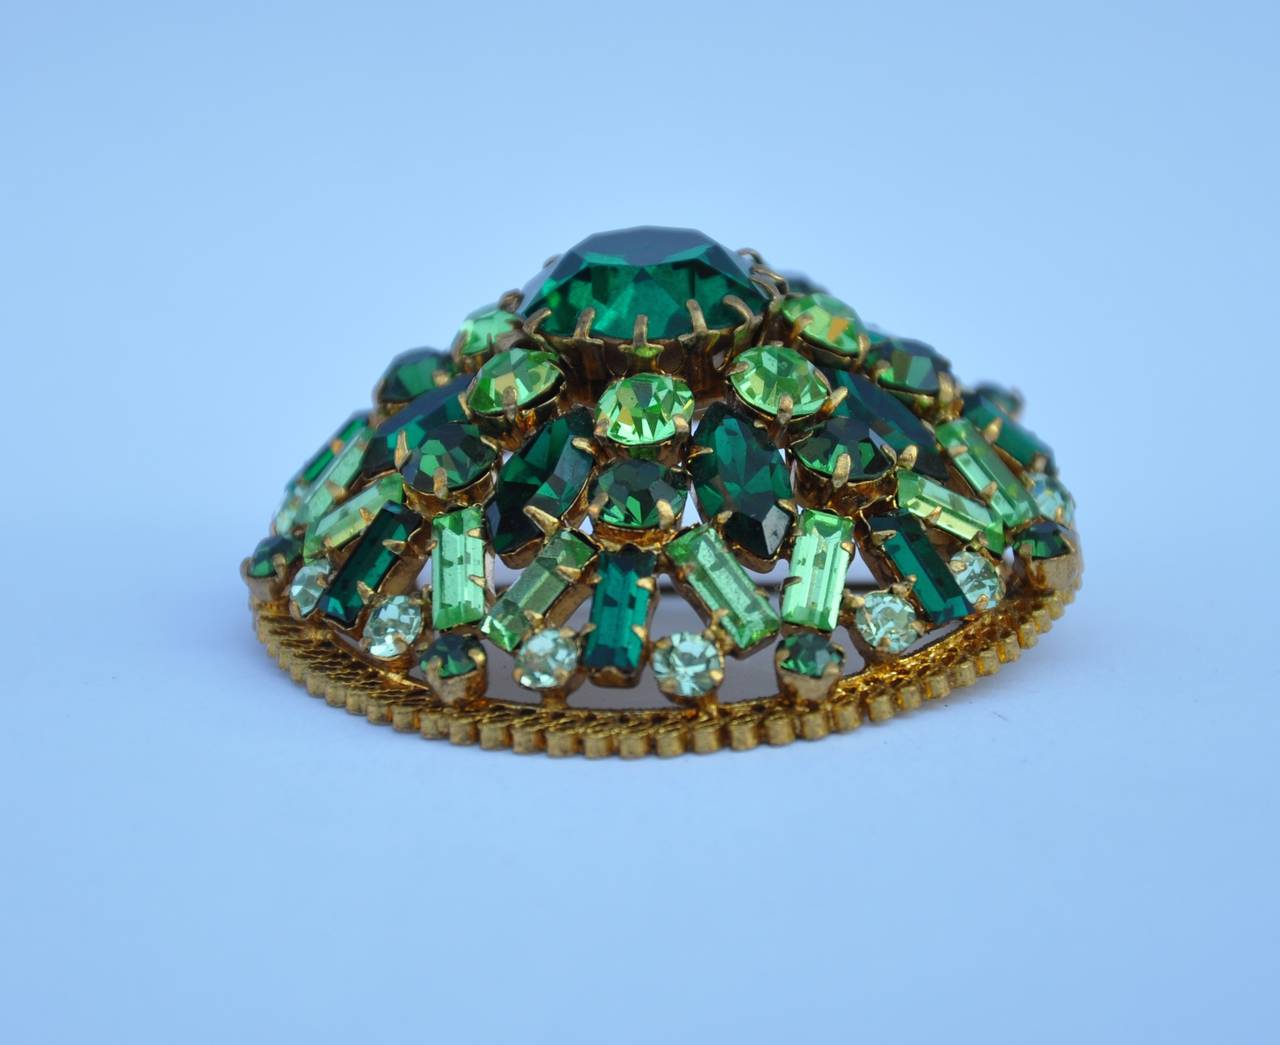 Made in Austria, this wonderfully detailed brooch has gilded gold hardware with filigree touches. The multi-size crystals with multiple shades of greens makes for a wonderful brooch. This brooch measures 2" in circumference with a depth of